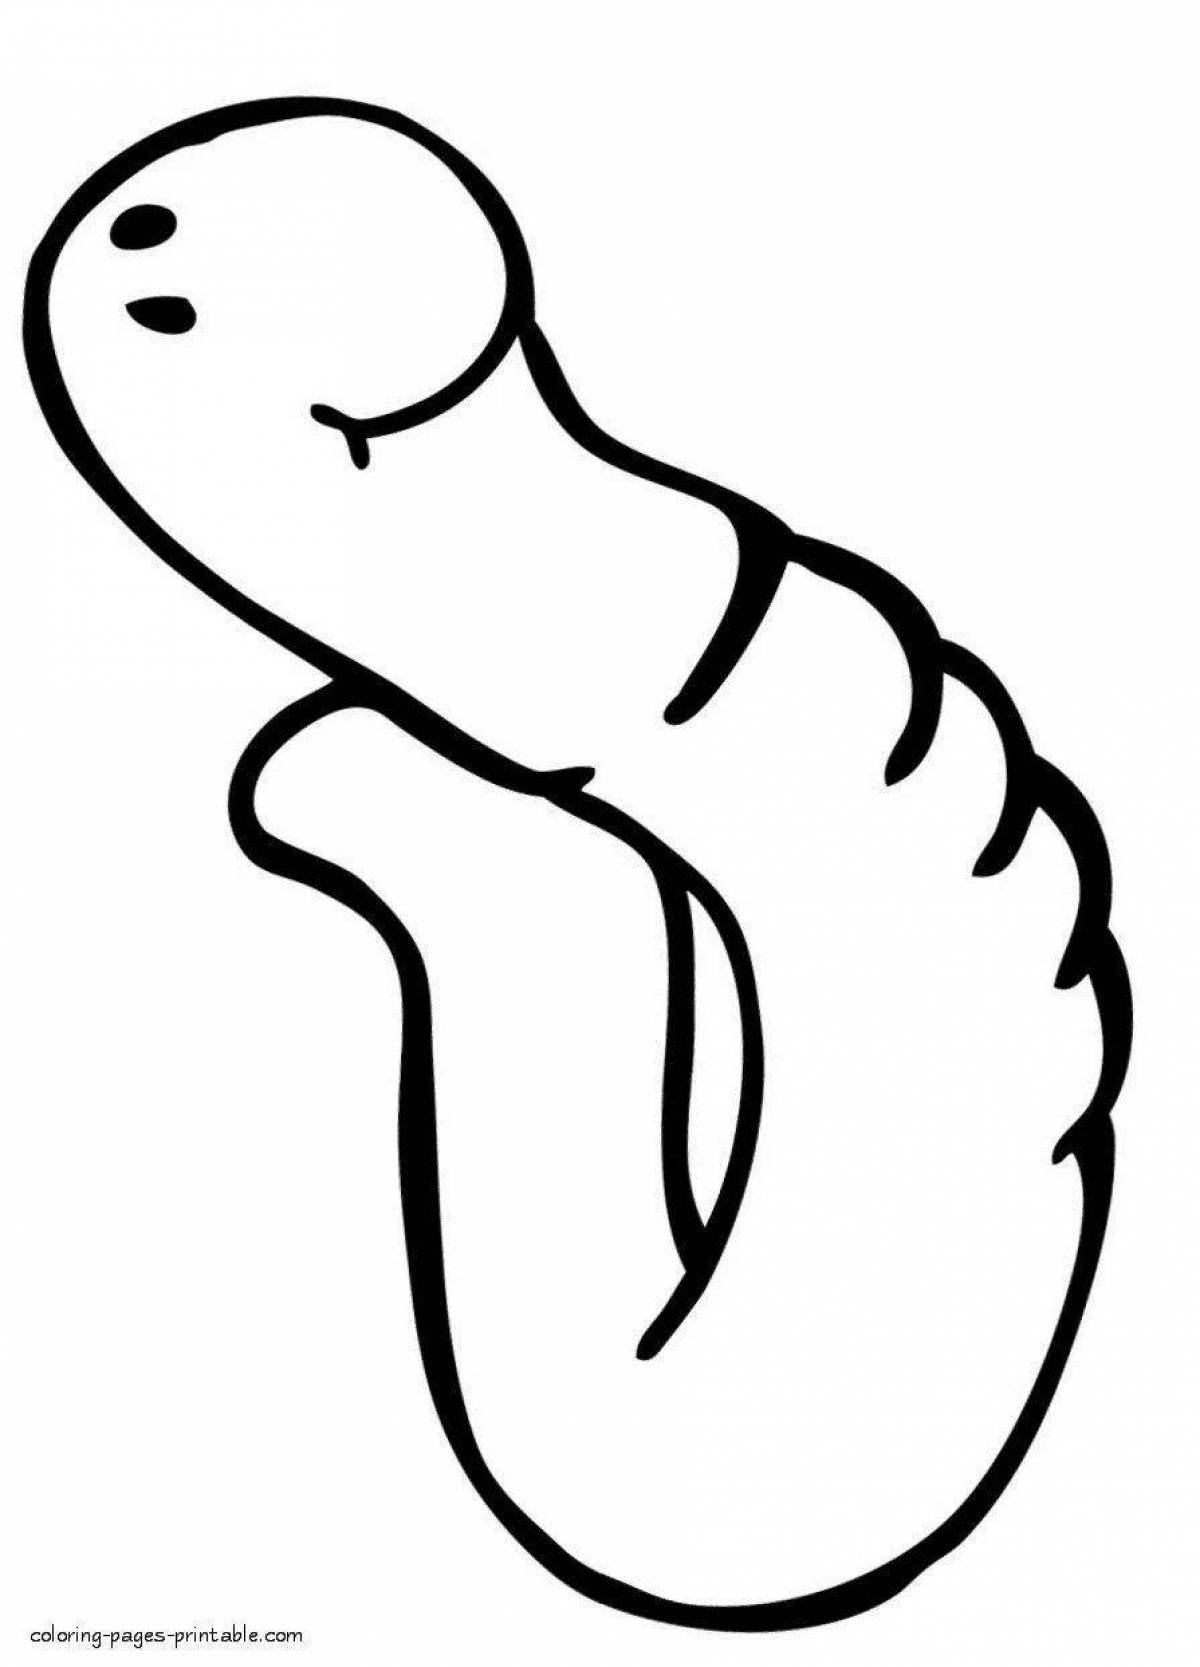 Magic worm coloring page